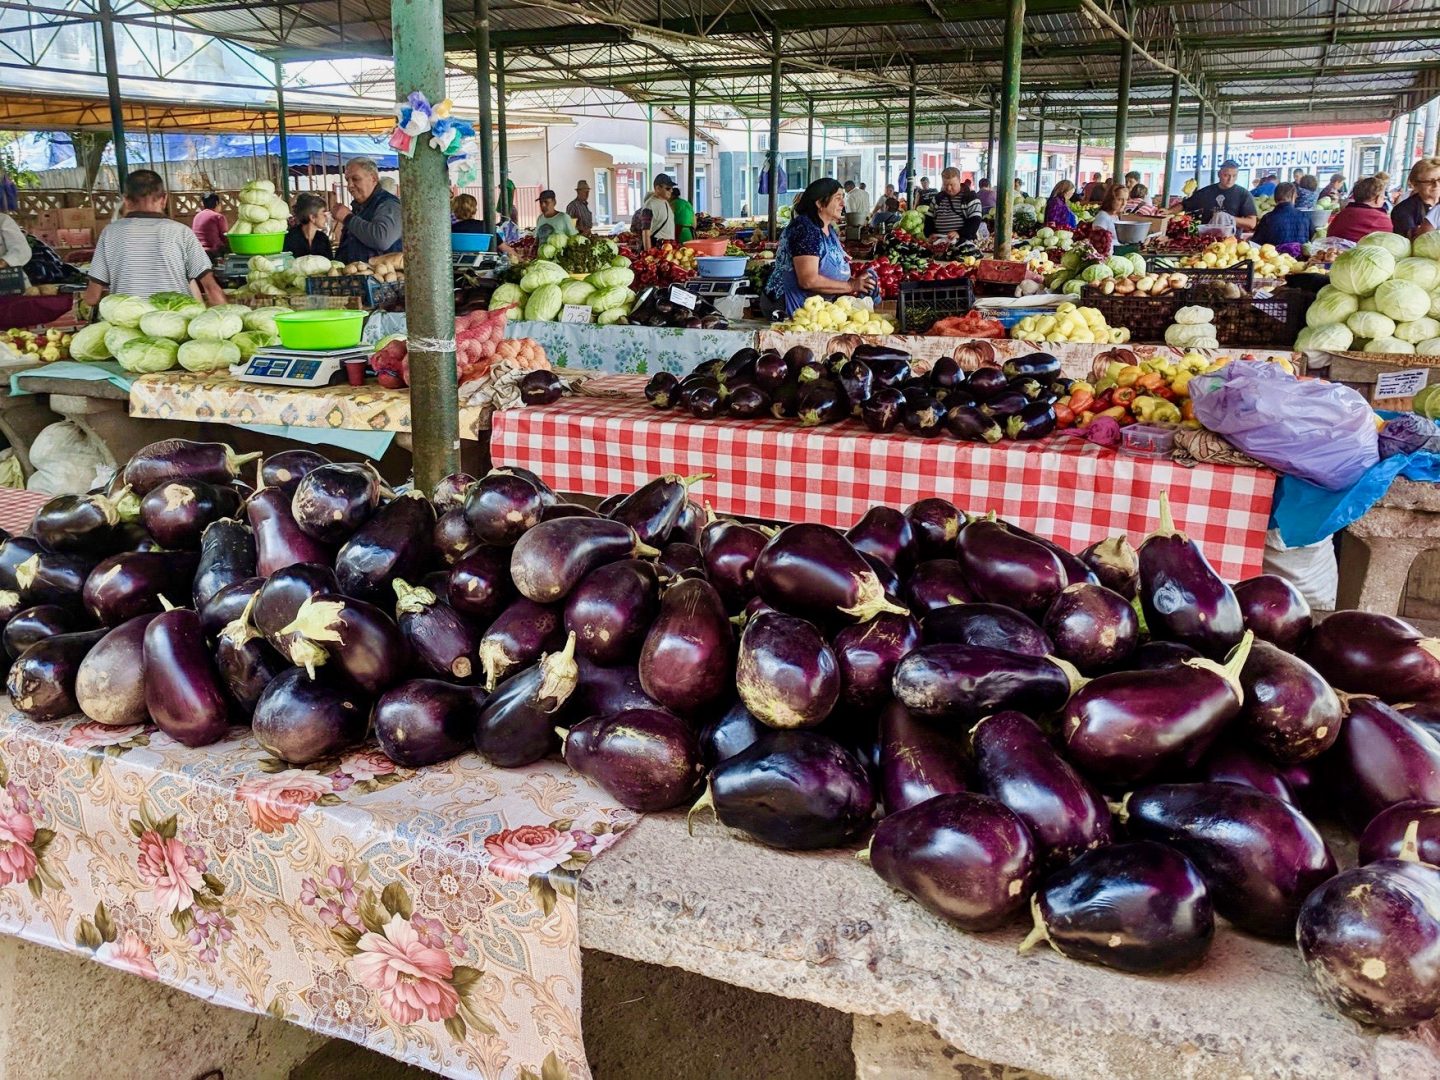 A shot of Turda market, with aubergines in the foreground and varies tables of vegetables in the background